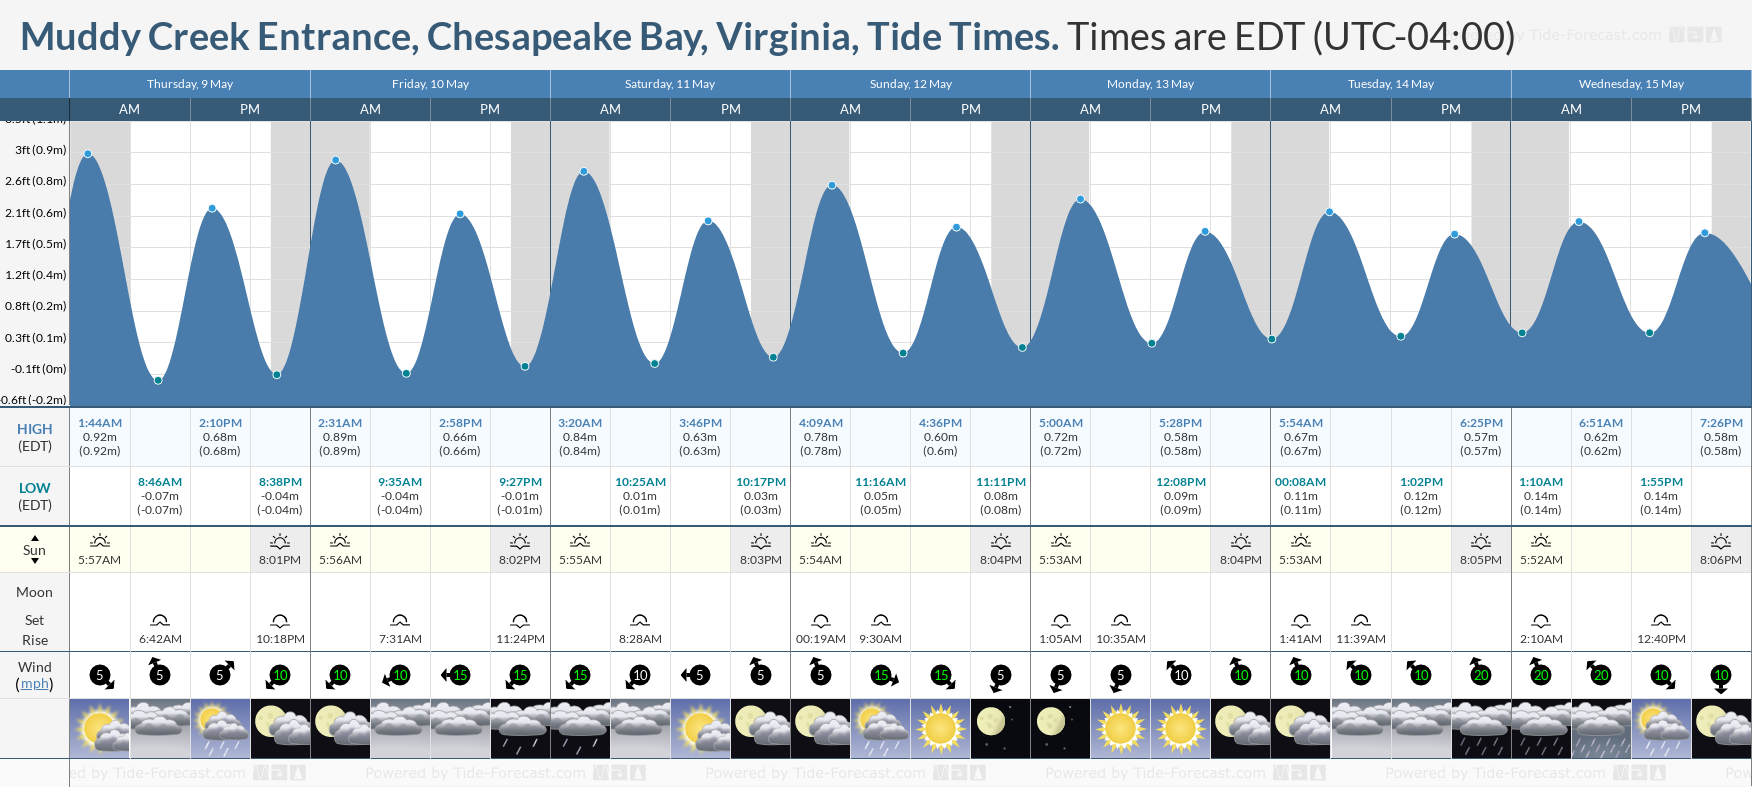 Muddy Creek Entrance, Chesapeake Bay, Virginia Tide Chart including high and low tide times for the next 7 days